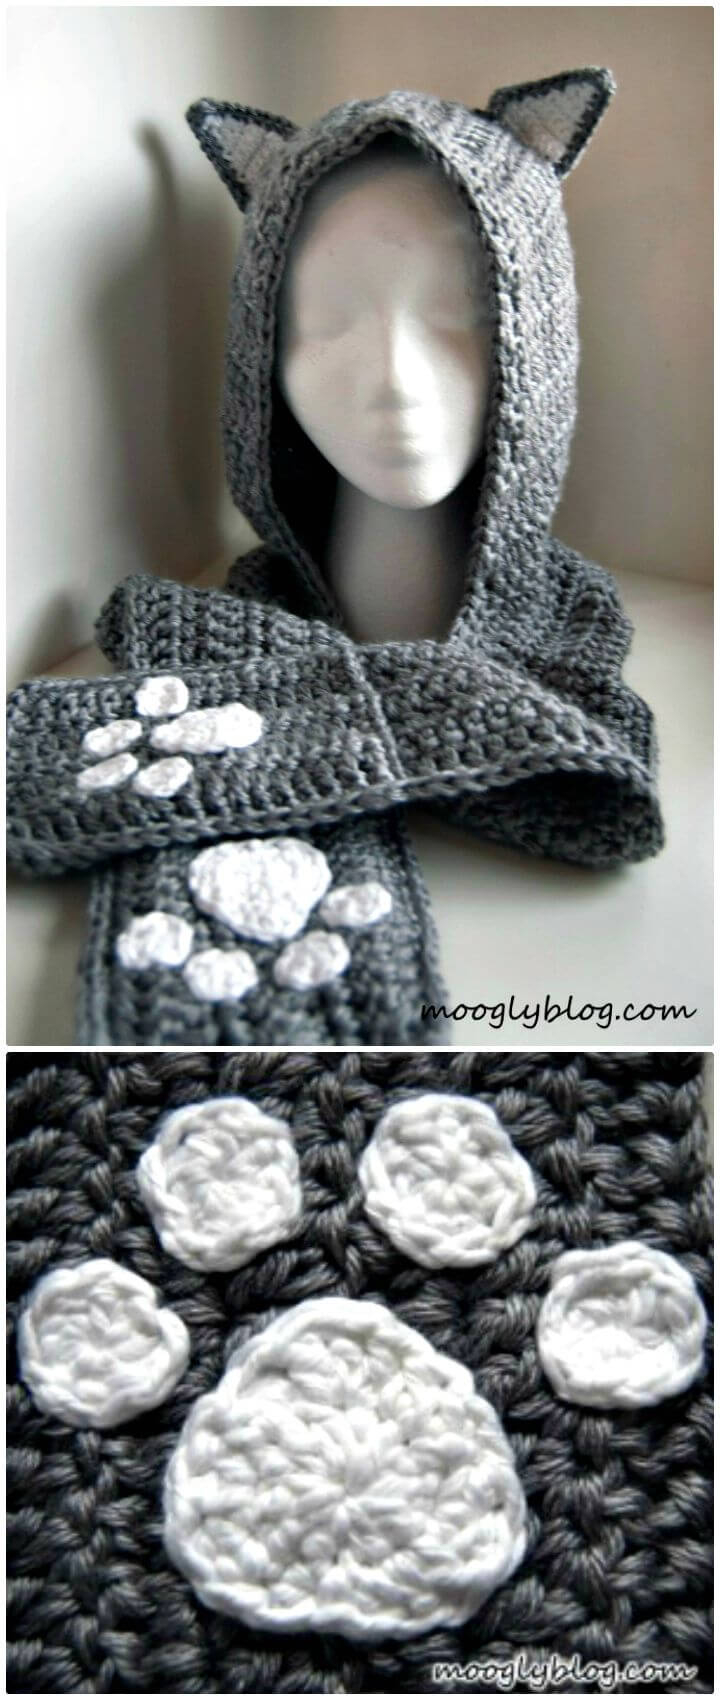 Knitted Hooded Scarf With Pockets Pattern 31 Free Crochet Hooded Scarf Patterns Diy Crafts